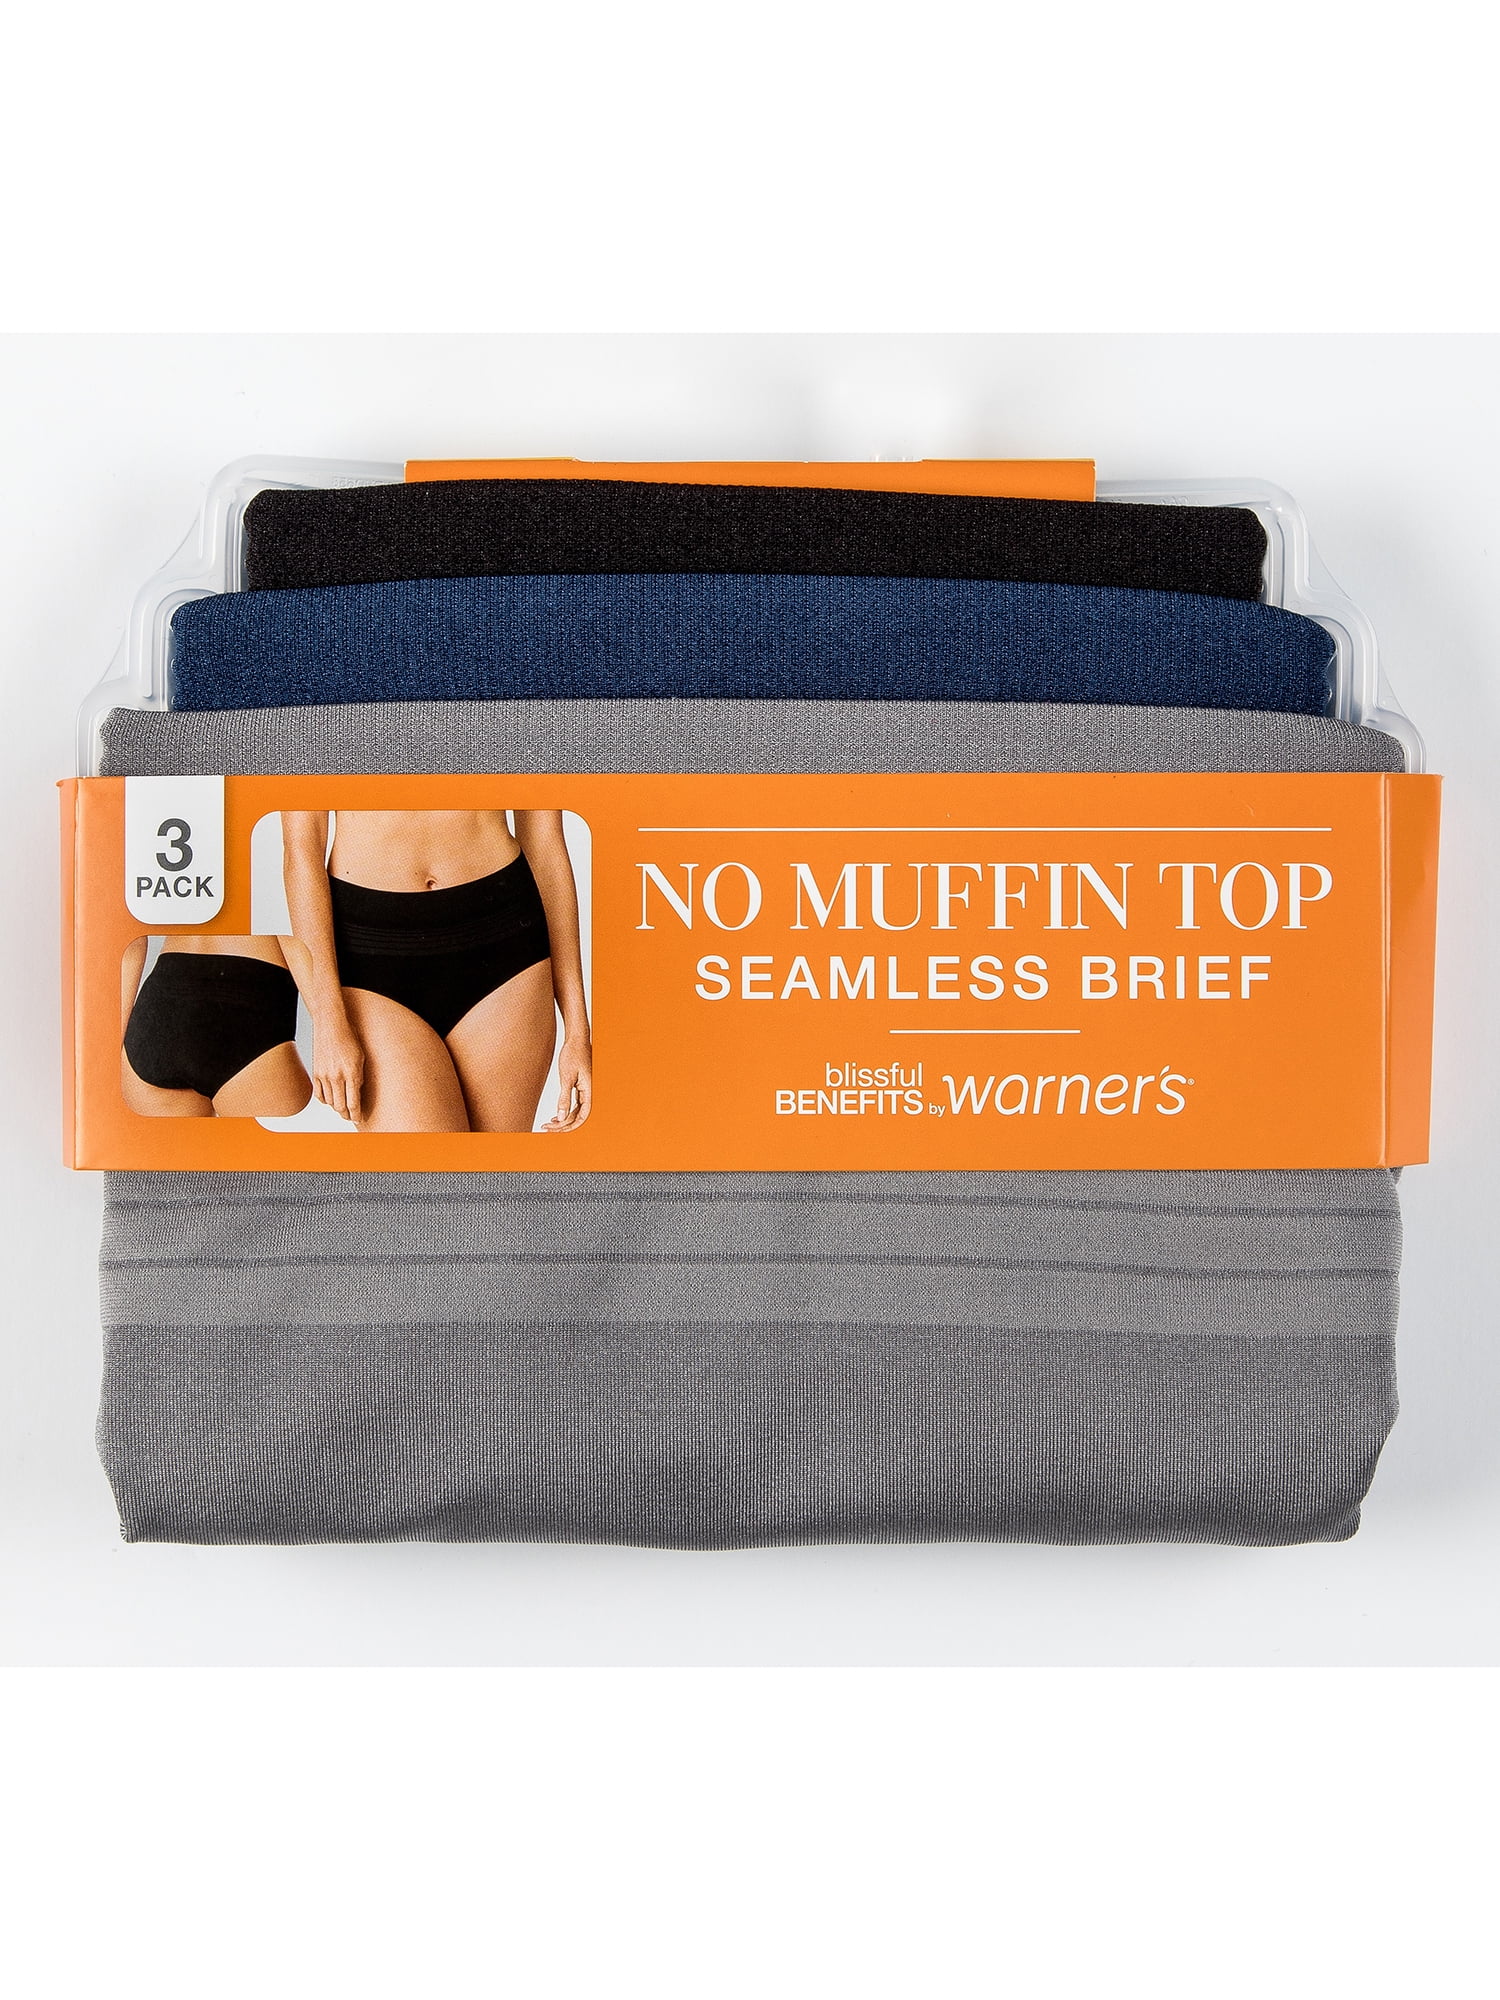 Blissful Benefits by Warner's Women's No Muffin Top Seamless Brief Panties  3-Pack, Style RS1503W #Ad #Women, #Affili…